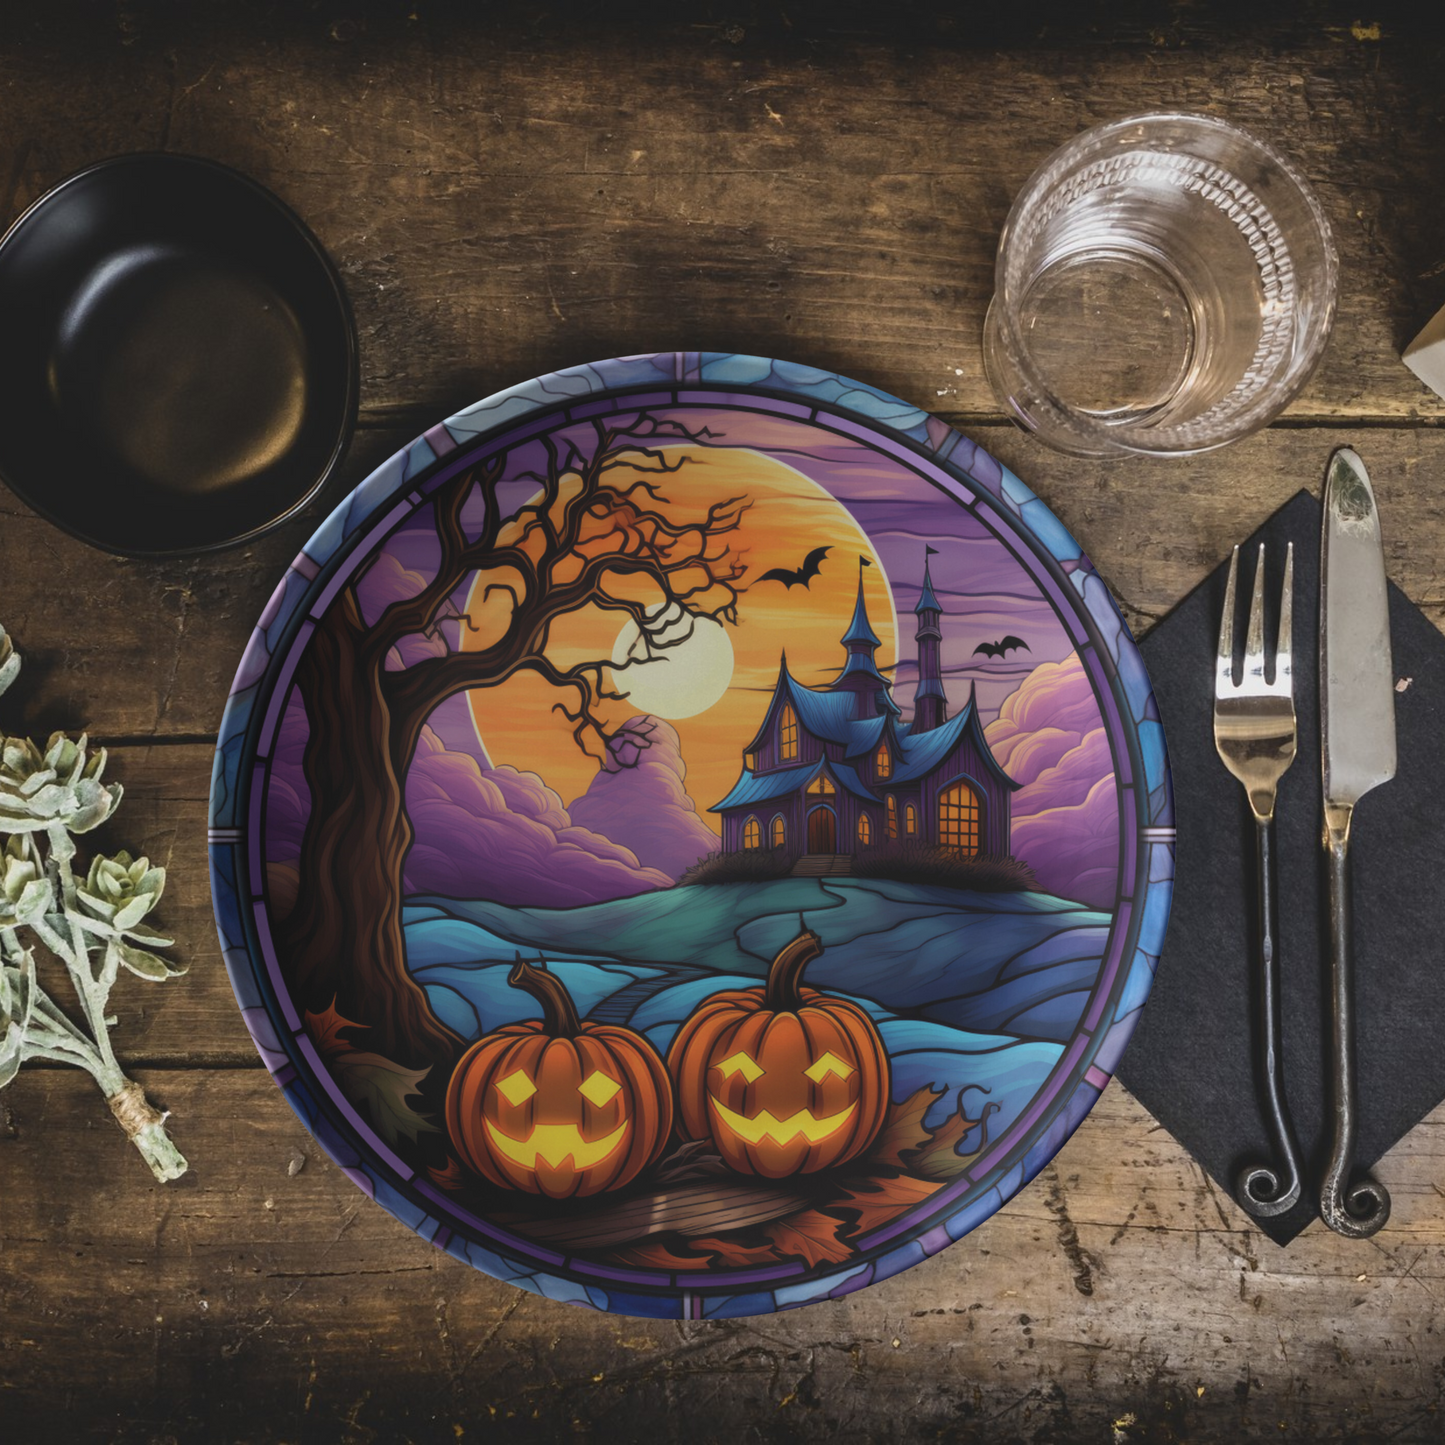 Haunted Mansion Thermosaf Polymer Plastic Halloween Plates Haunted House Dinnerware